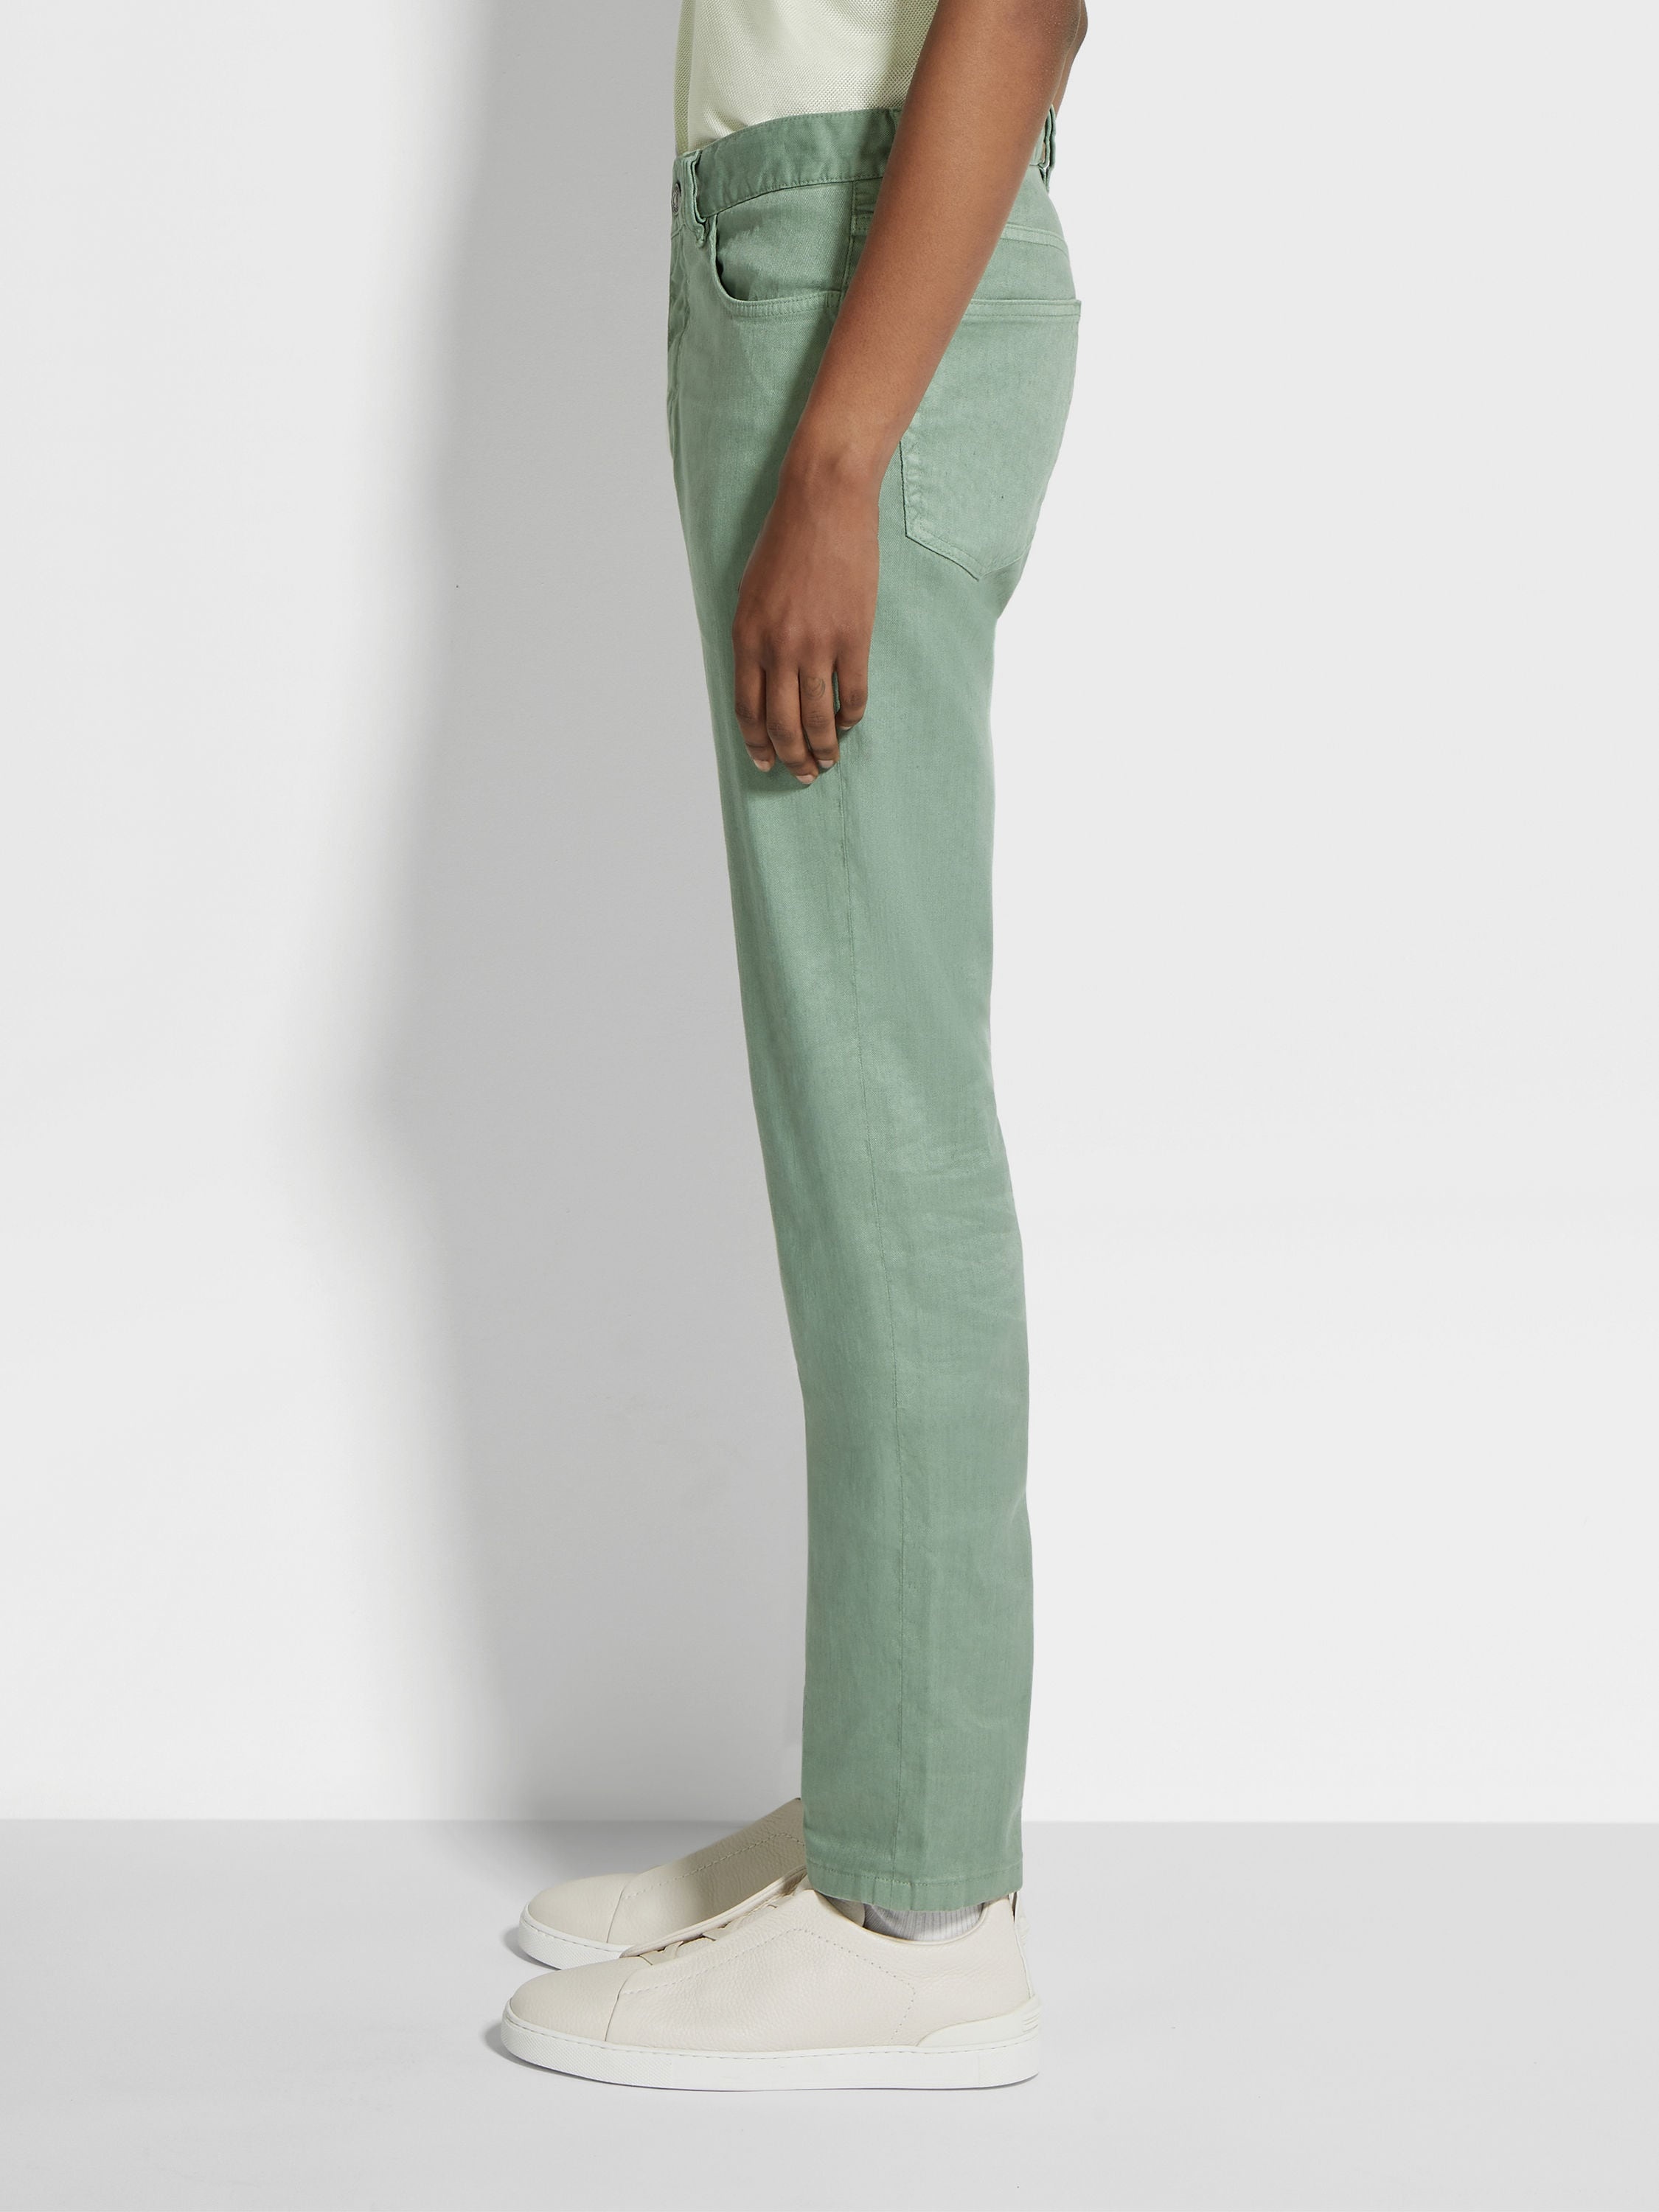 SAGE GREEN STRETCH LINEN AND COTTON ROCCIA JEANS - 3